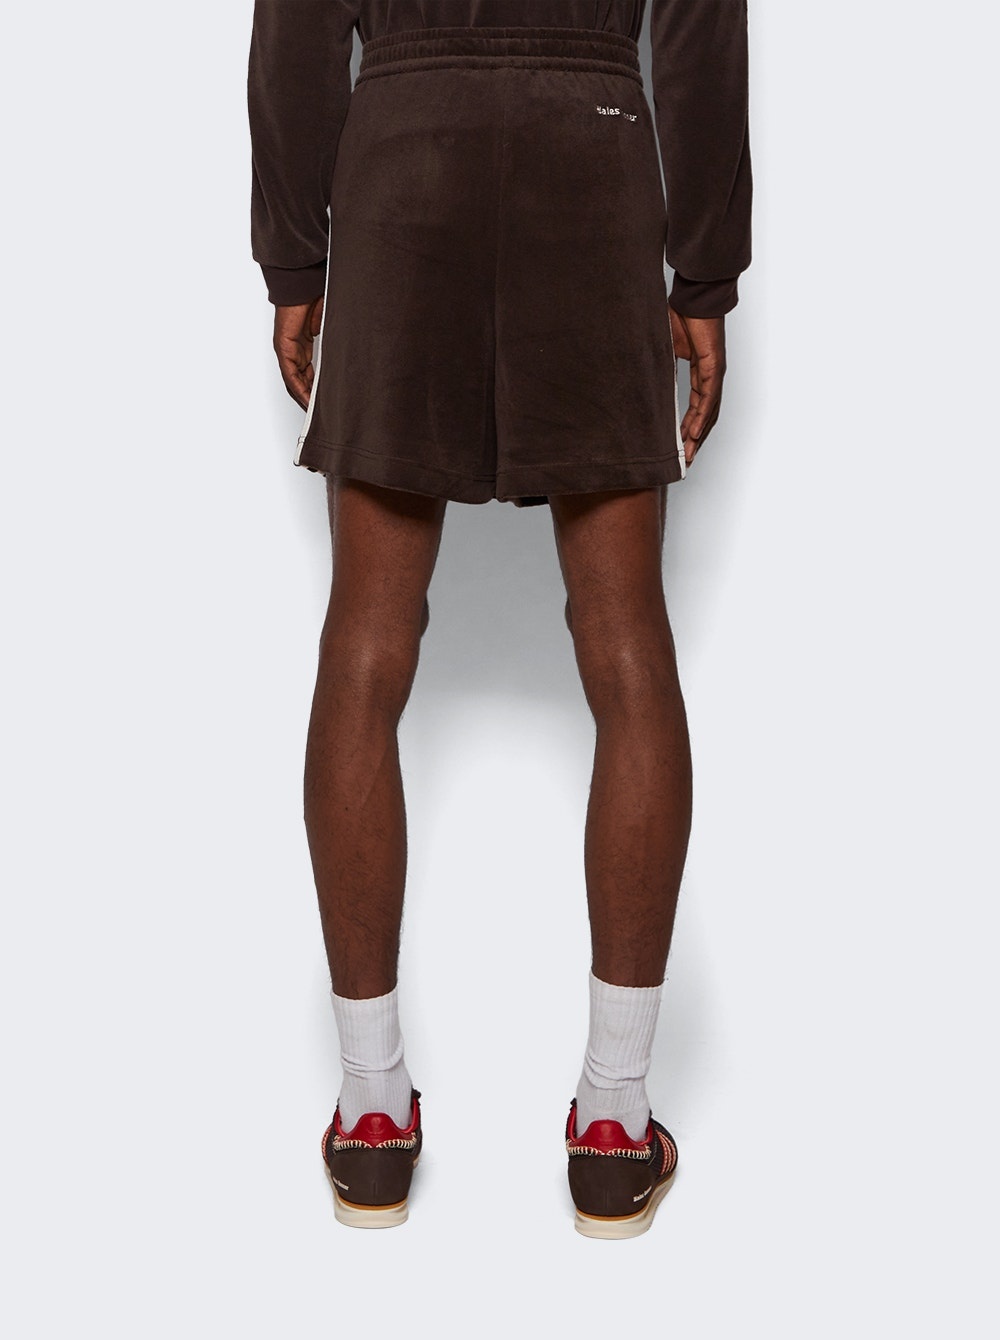 x Wales Bonner twill shorts in brown - Adidas